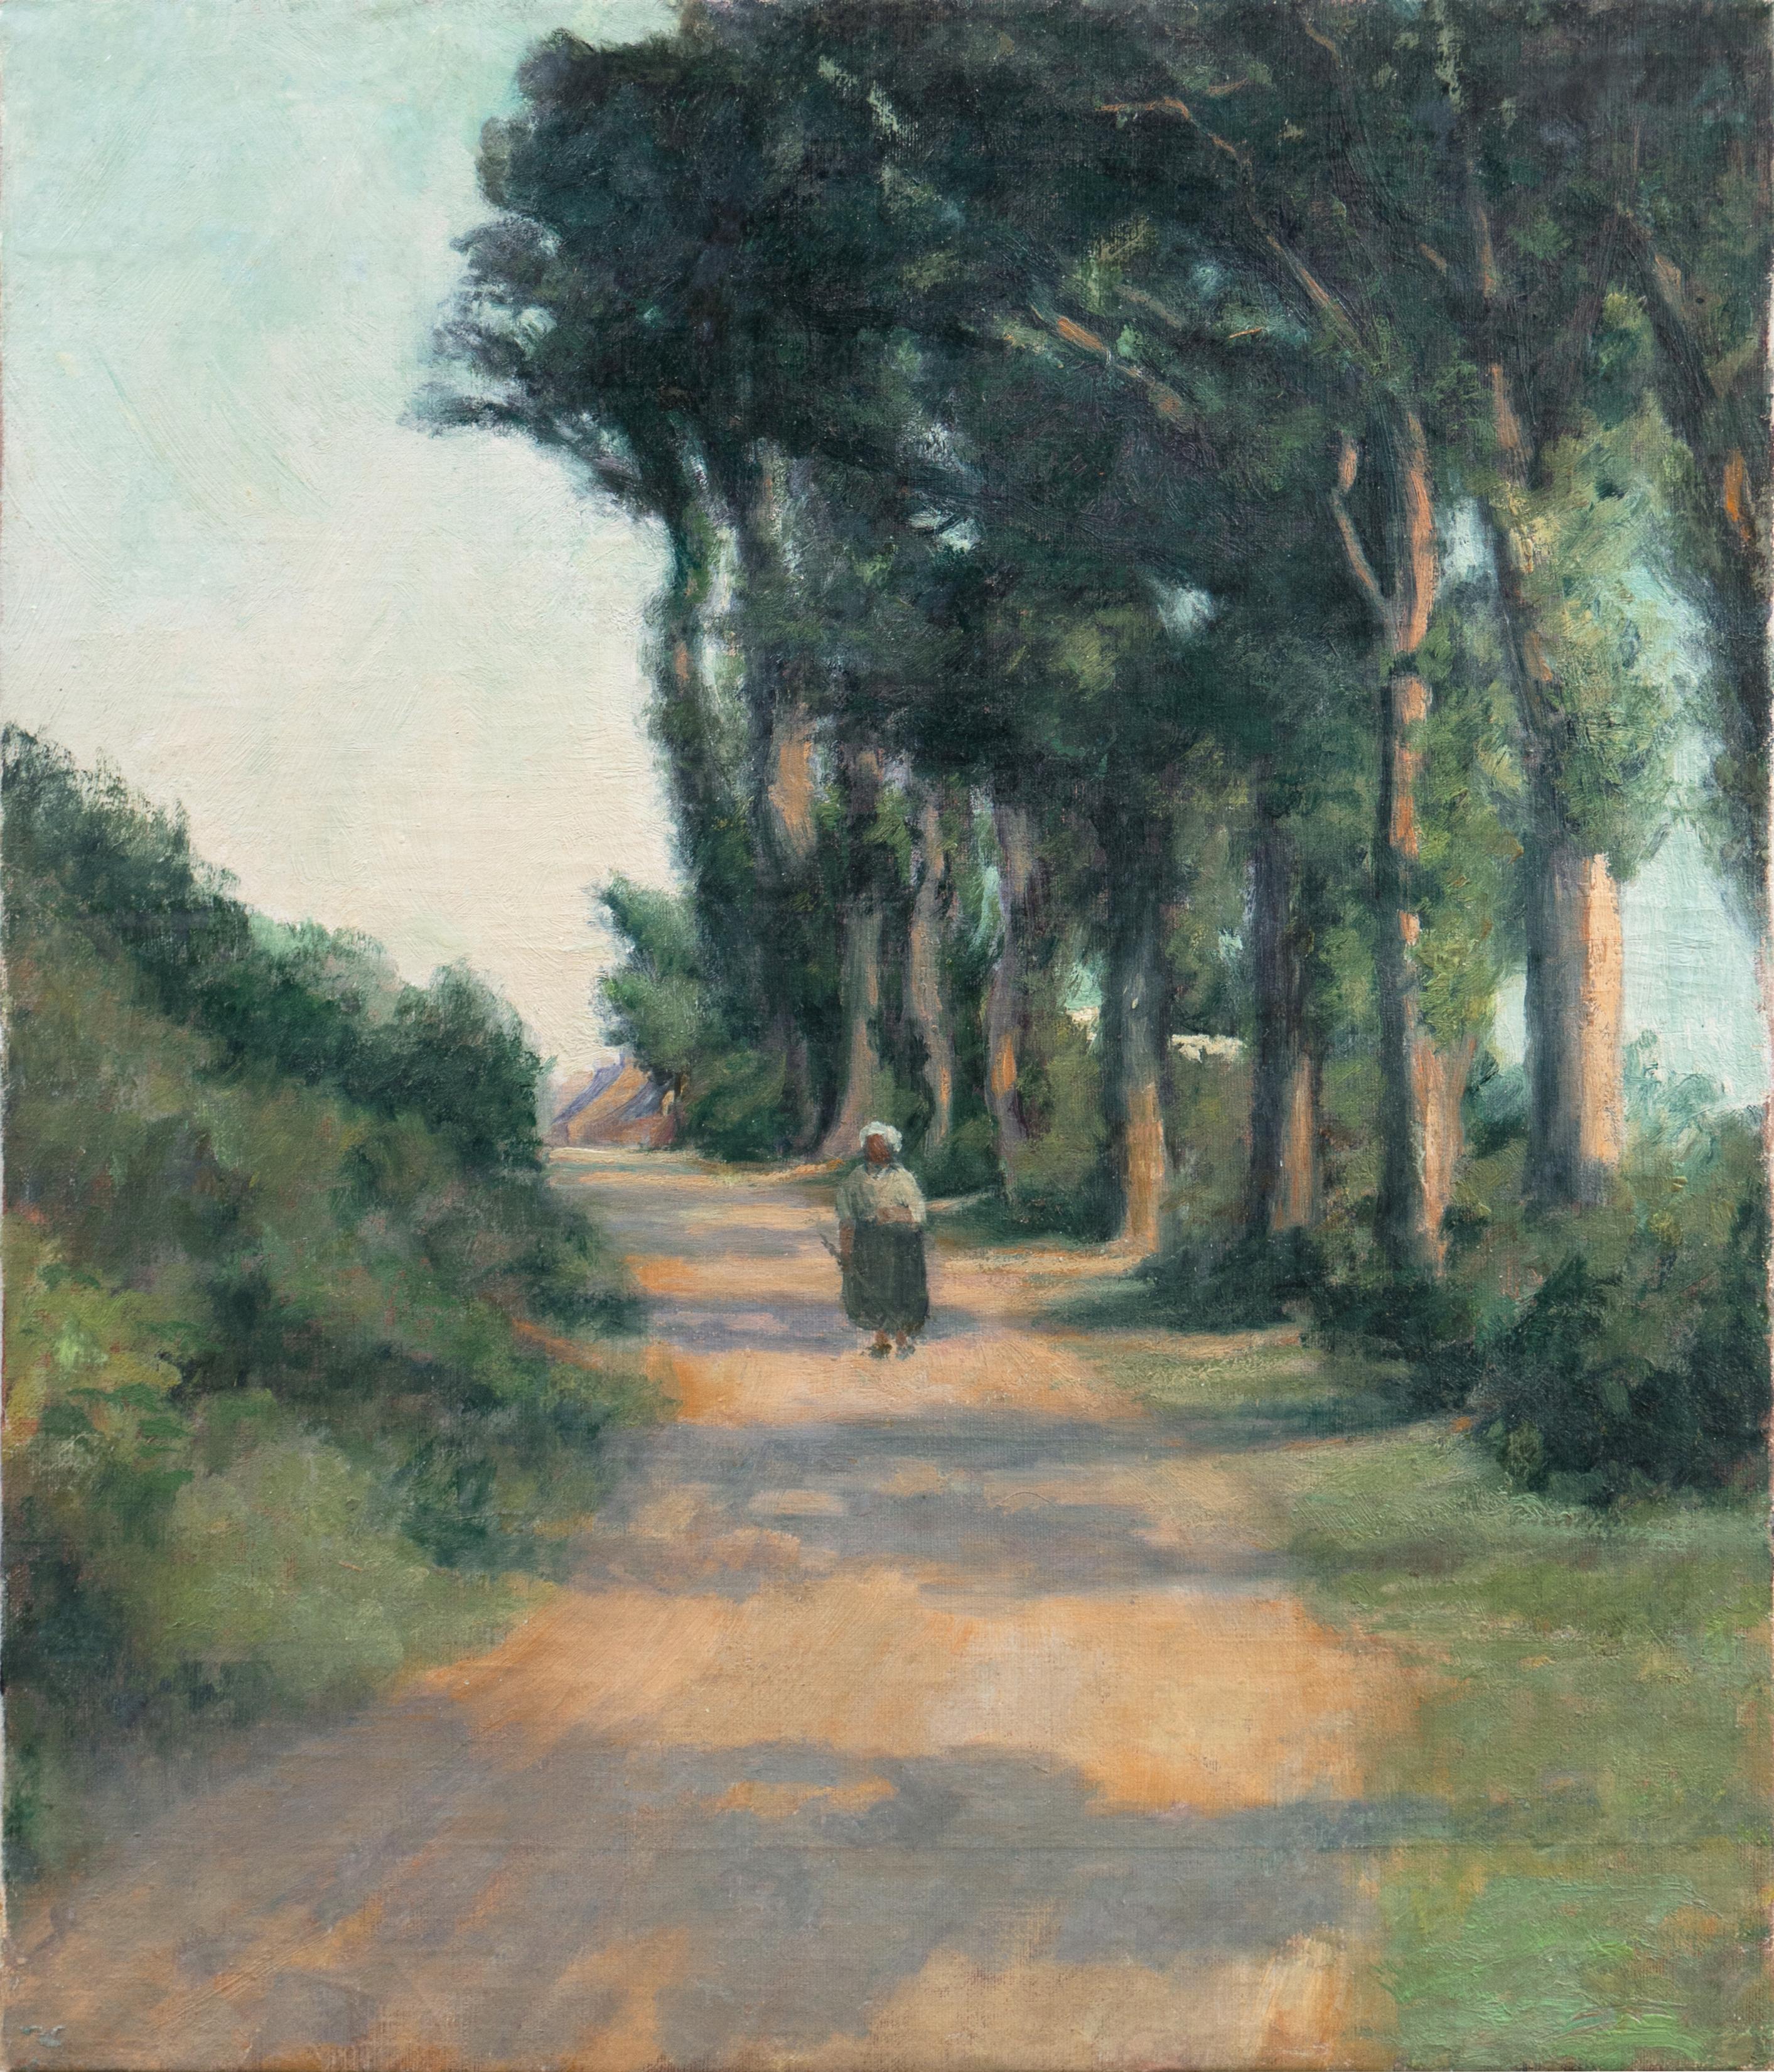 American School Landscape Painting - 'Eucalyptus Road, Sunset', Early 20th Century, American Impressionist Landscape